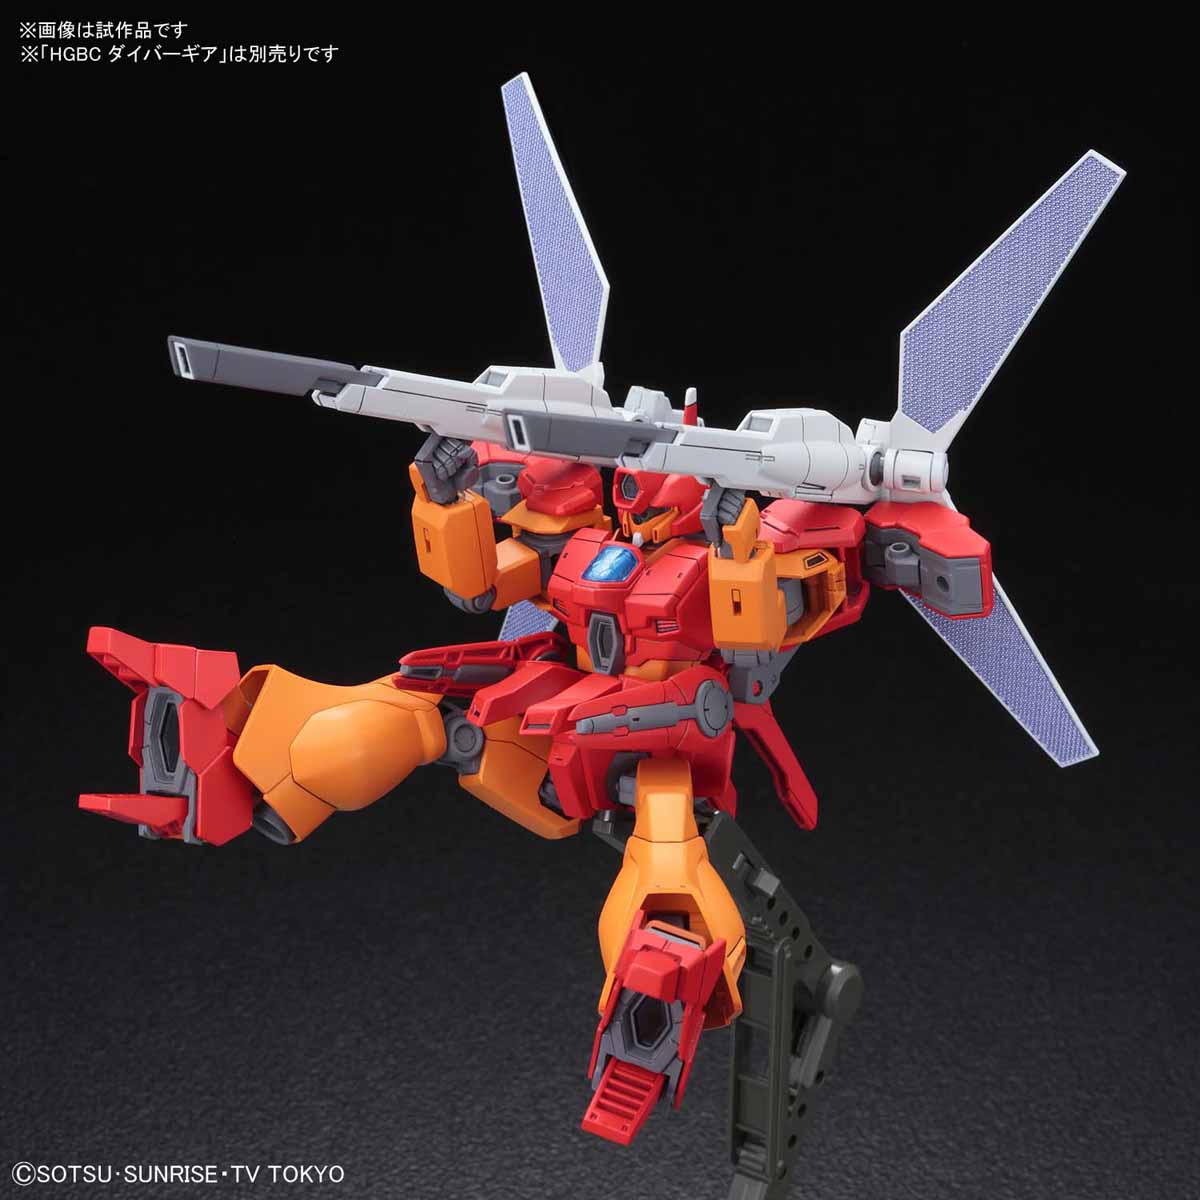 HGBD 1/144 Jegan Blast Master - Release Info - Gundam Kits Collection News and Reviews